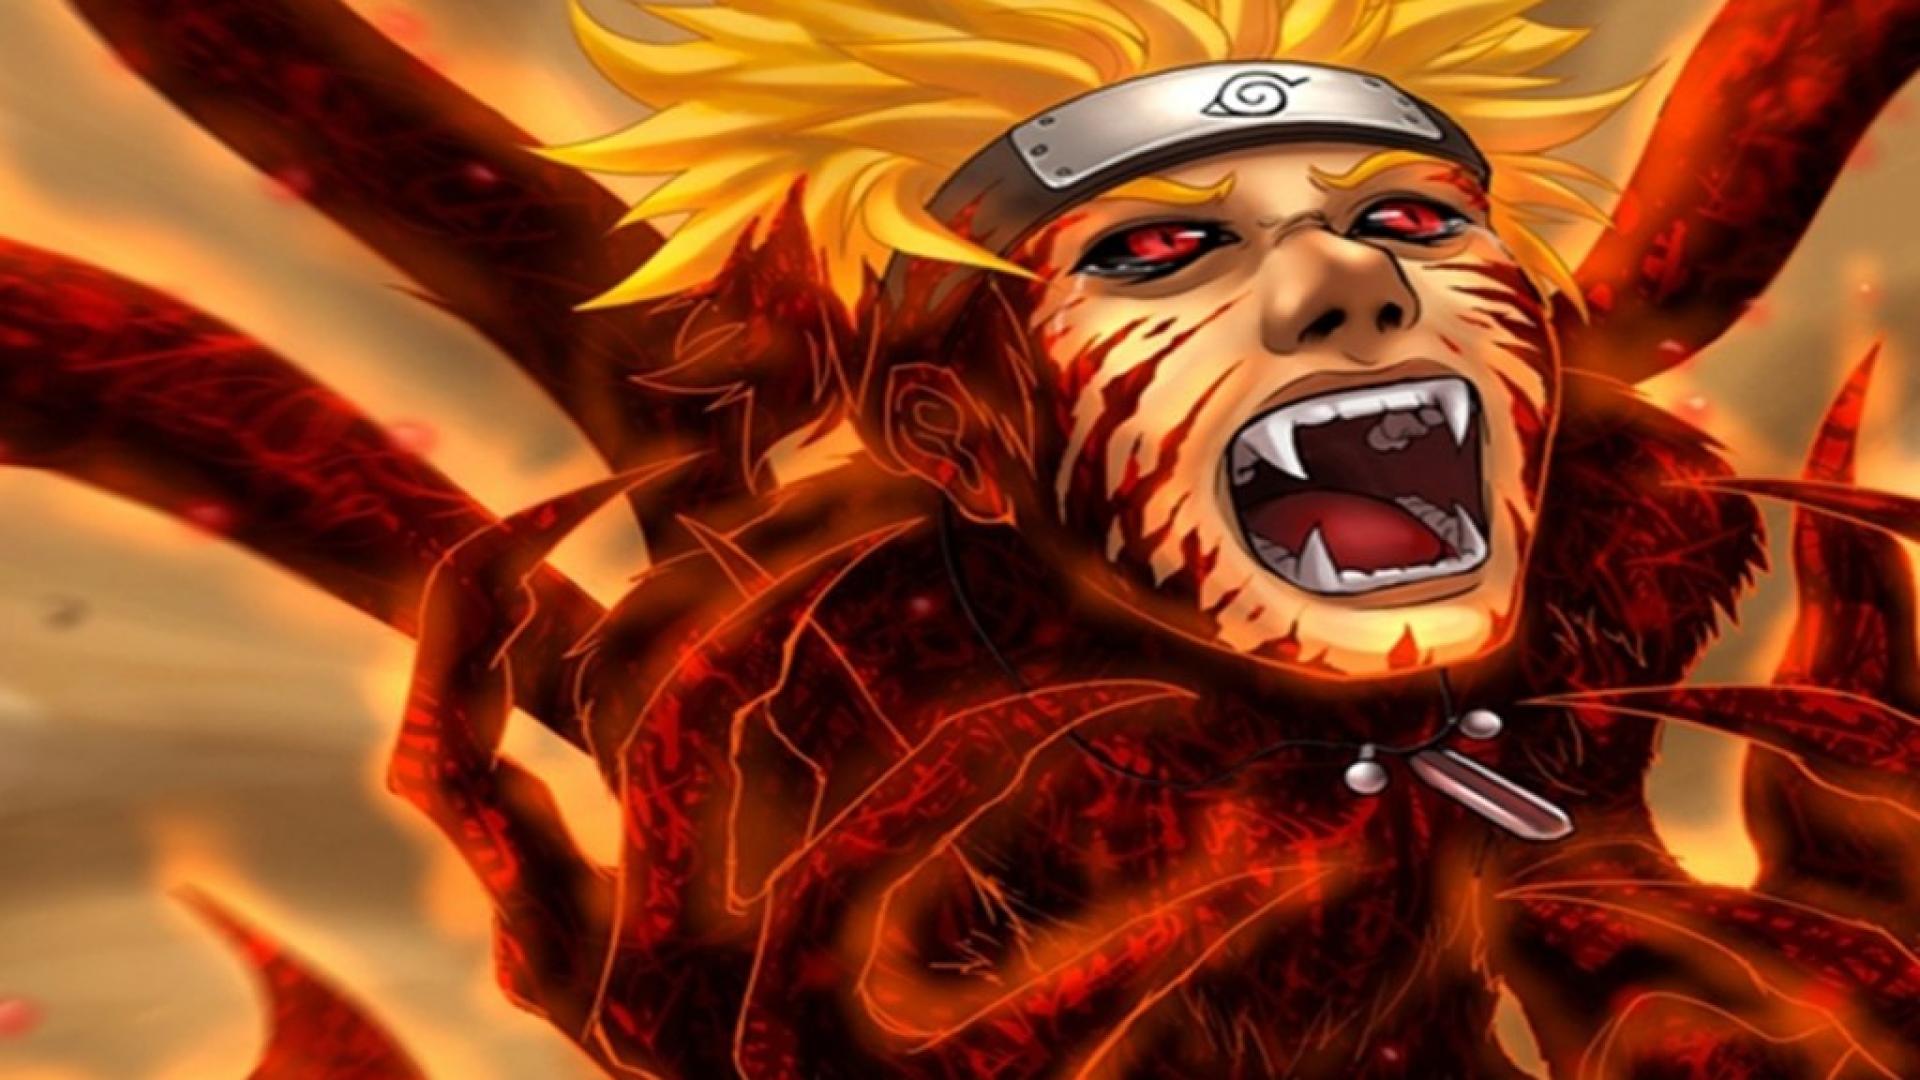 HD Image Of Naruto Px Now